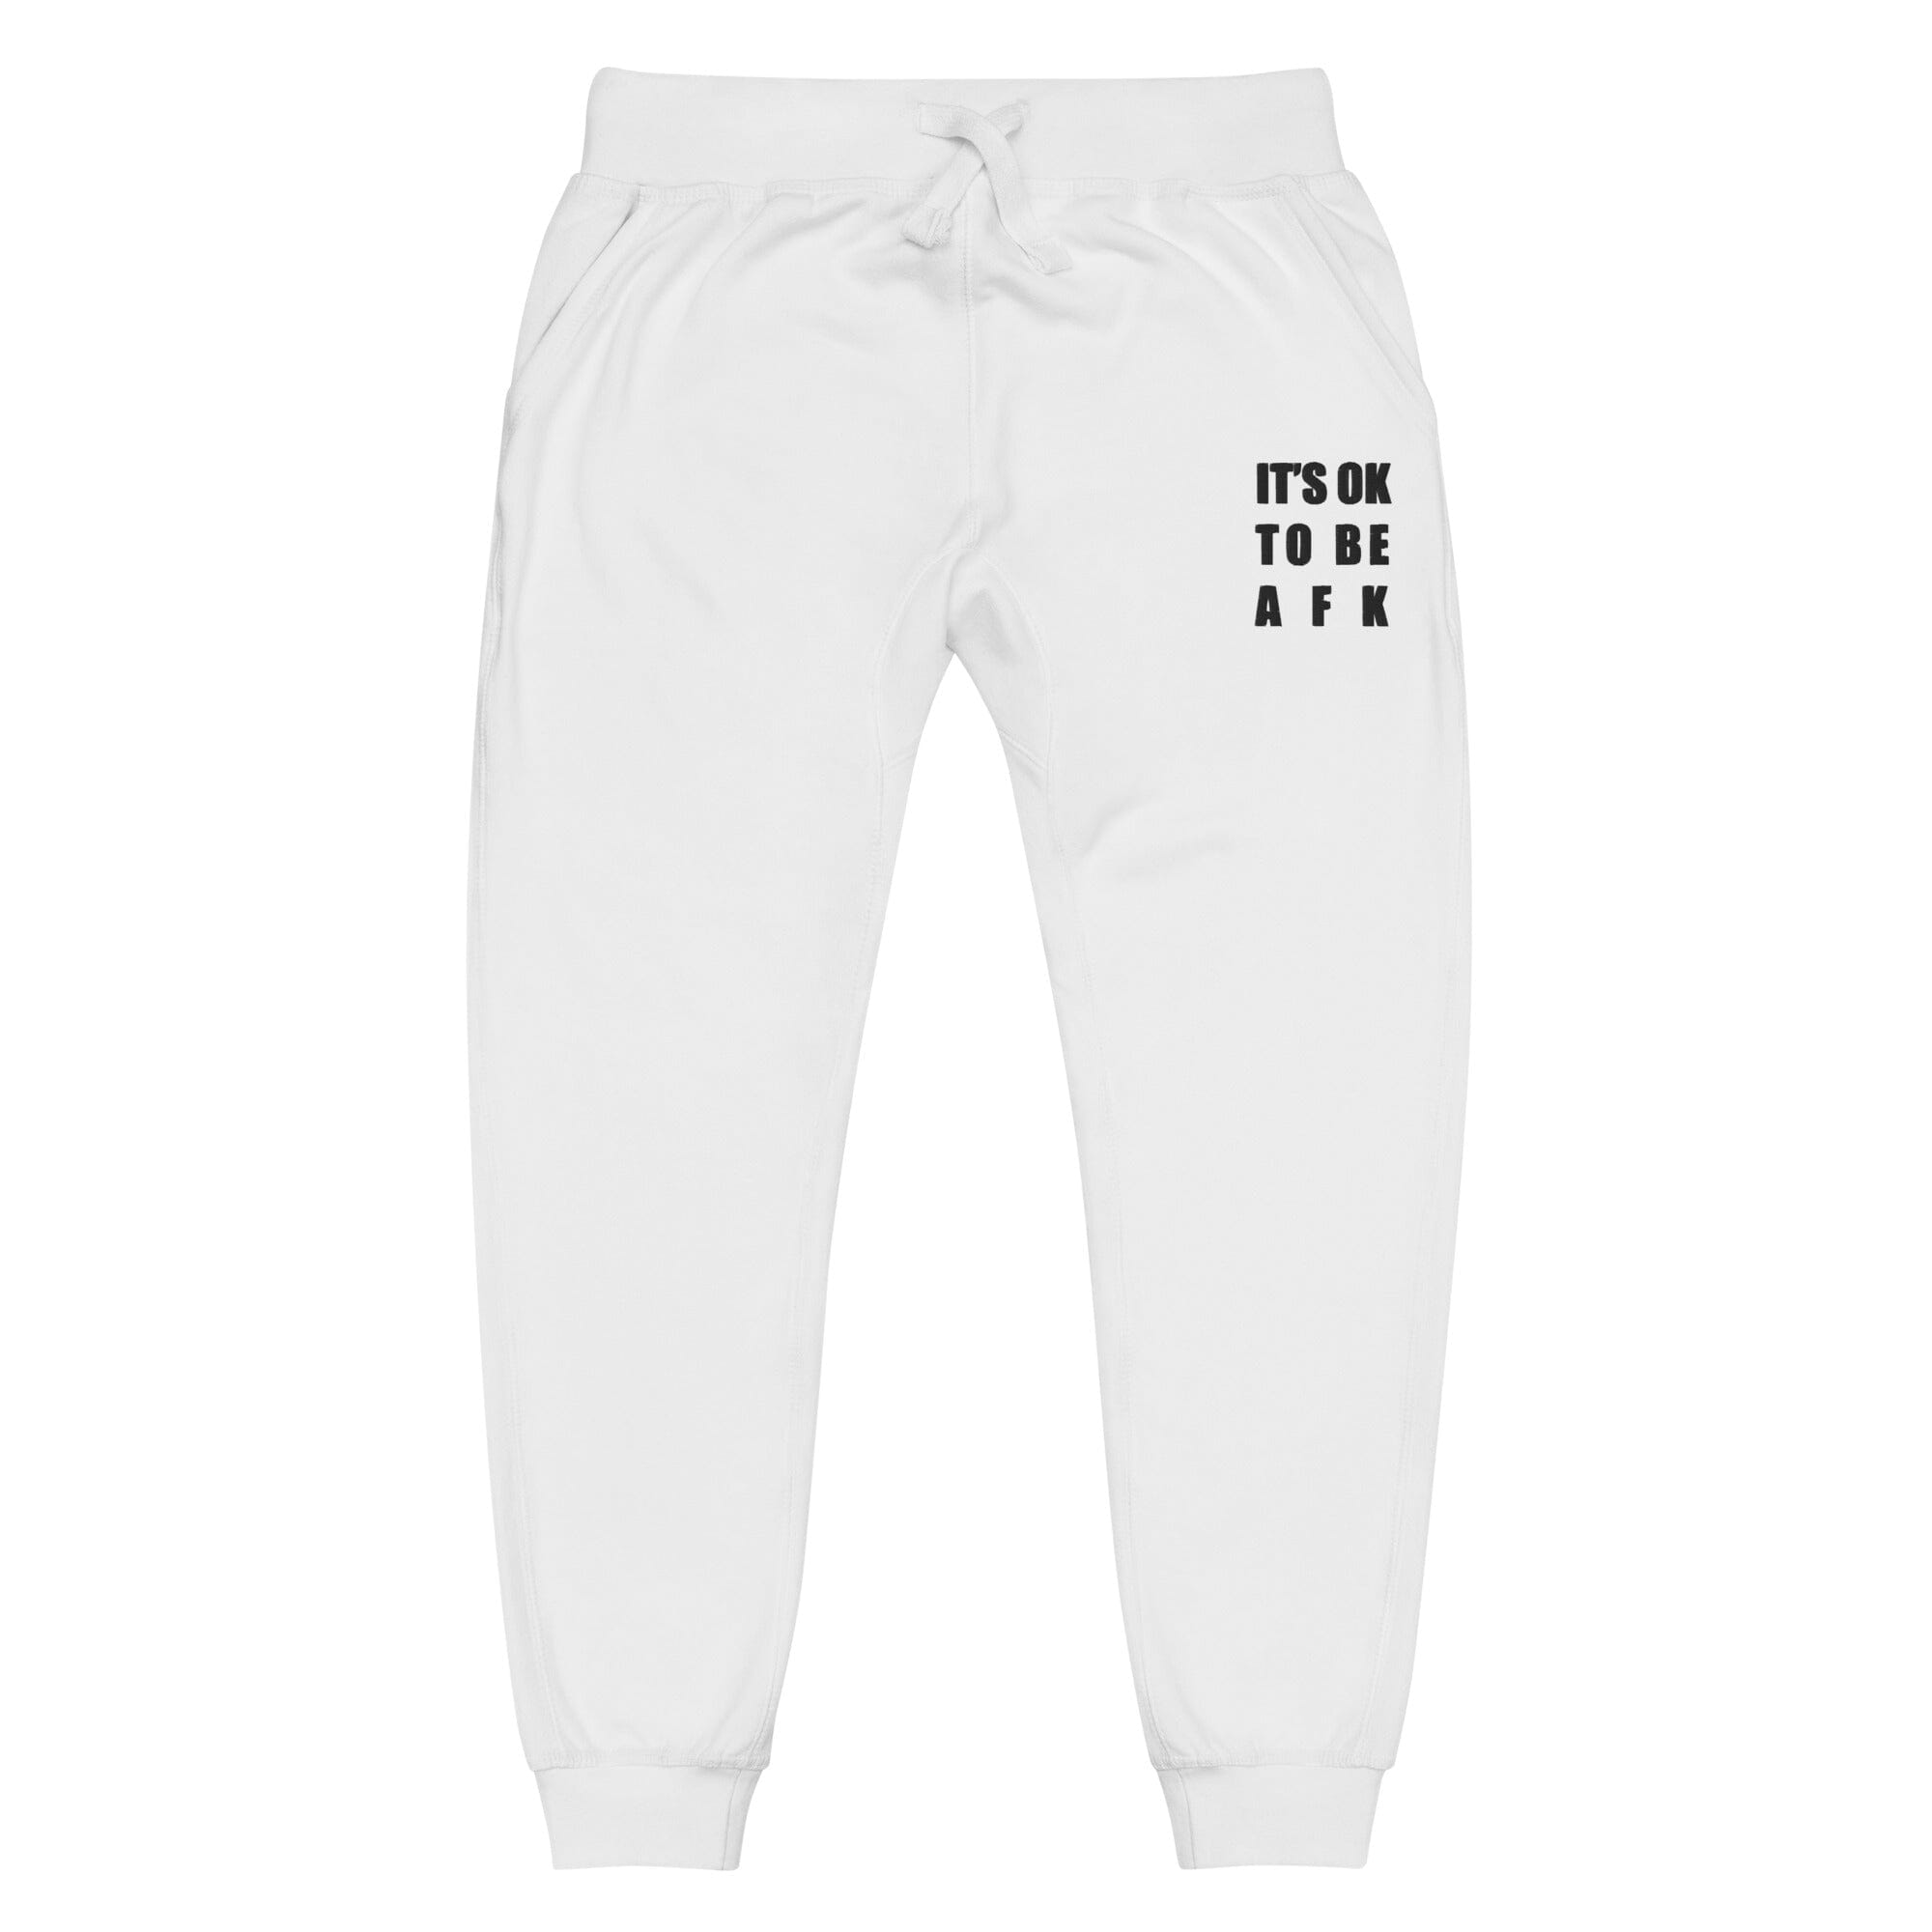 It's Ok to be AFK | Unisex fleece sweatpants | Gamer Affirmations Threads & Thistles Inventory White XS 